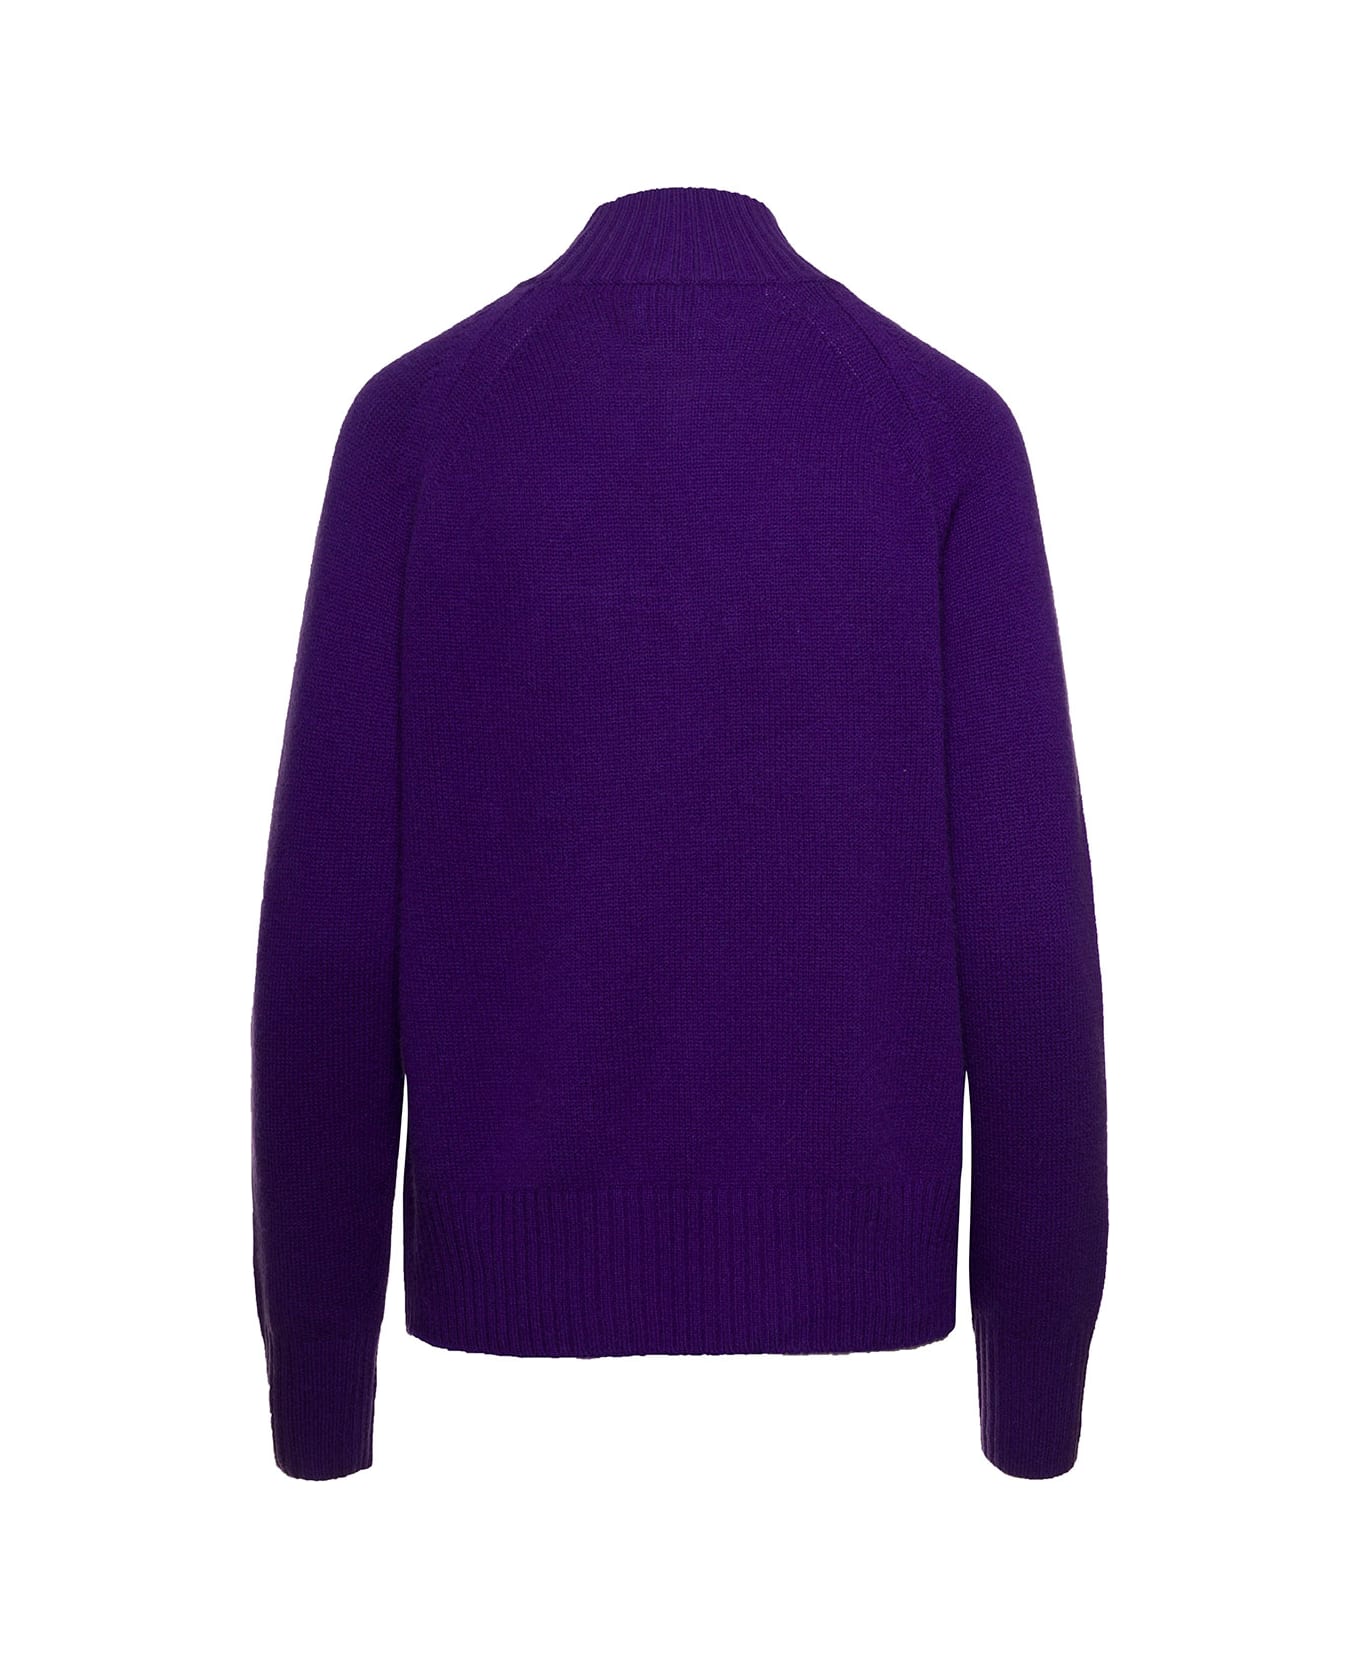 Allude Violet Mockneck Sweater With Ribbed Trim In Cashmere Woman - Violet